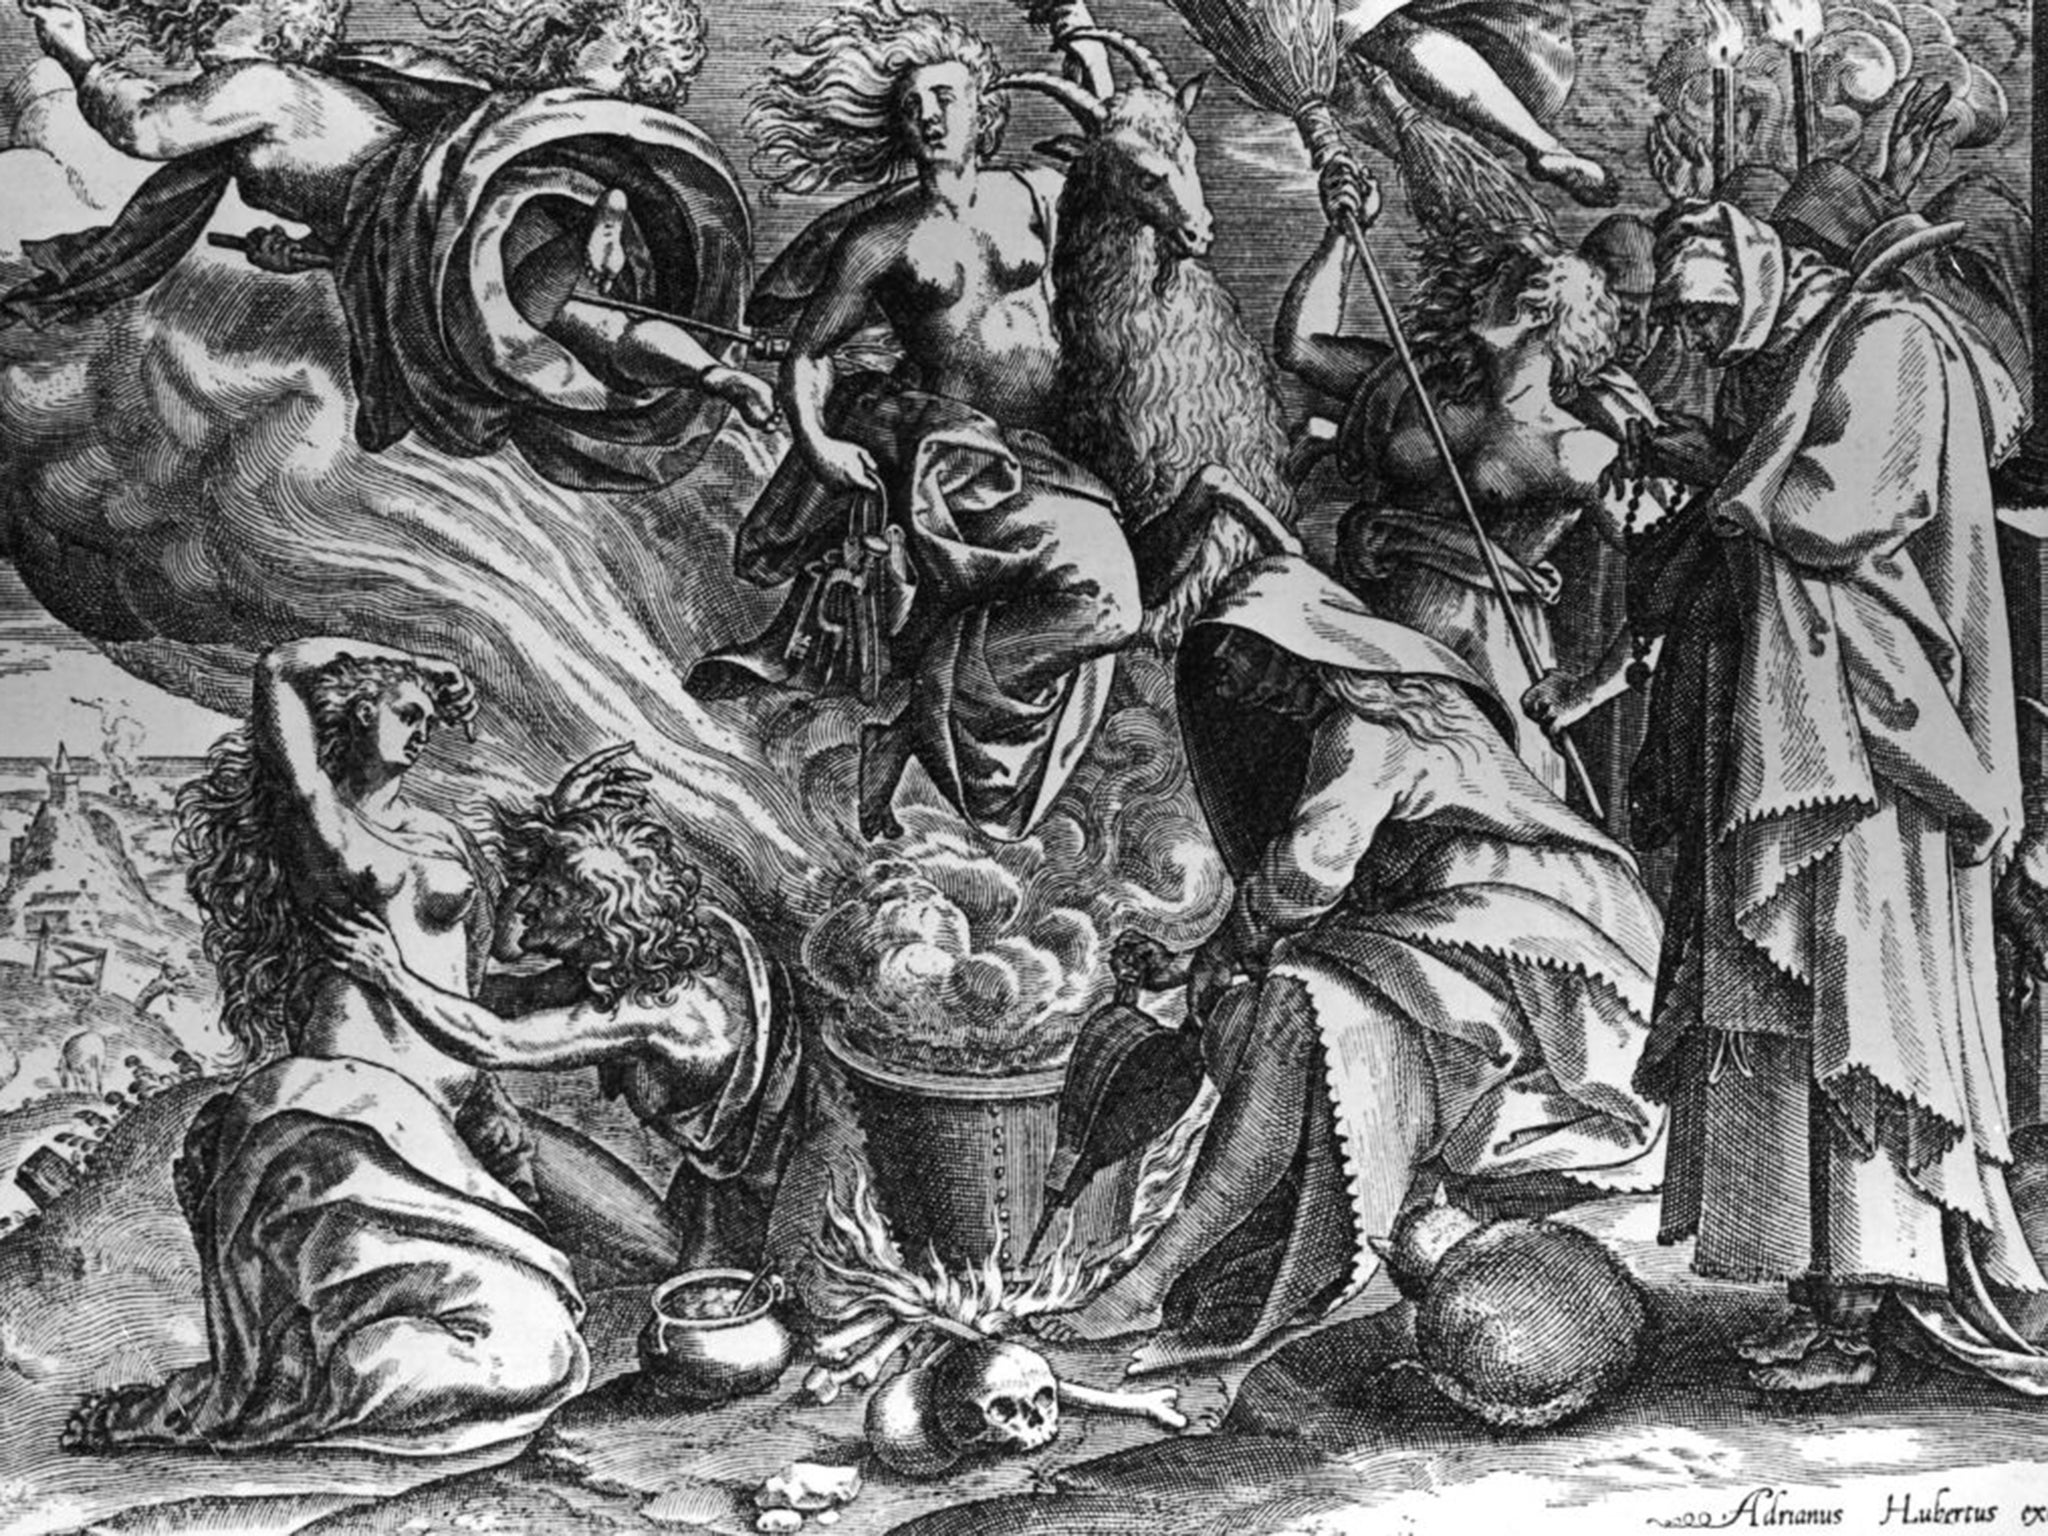 Foul practices: Witches depicted by Adrianus Hubertus c1650